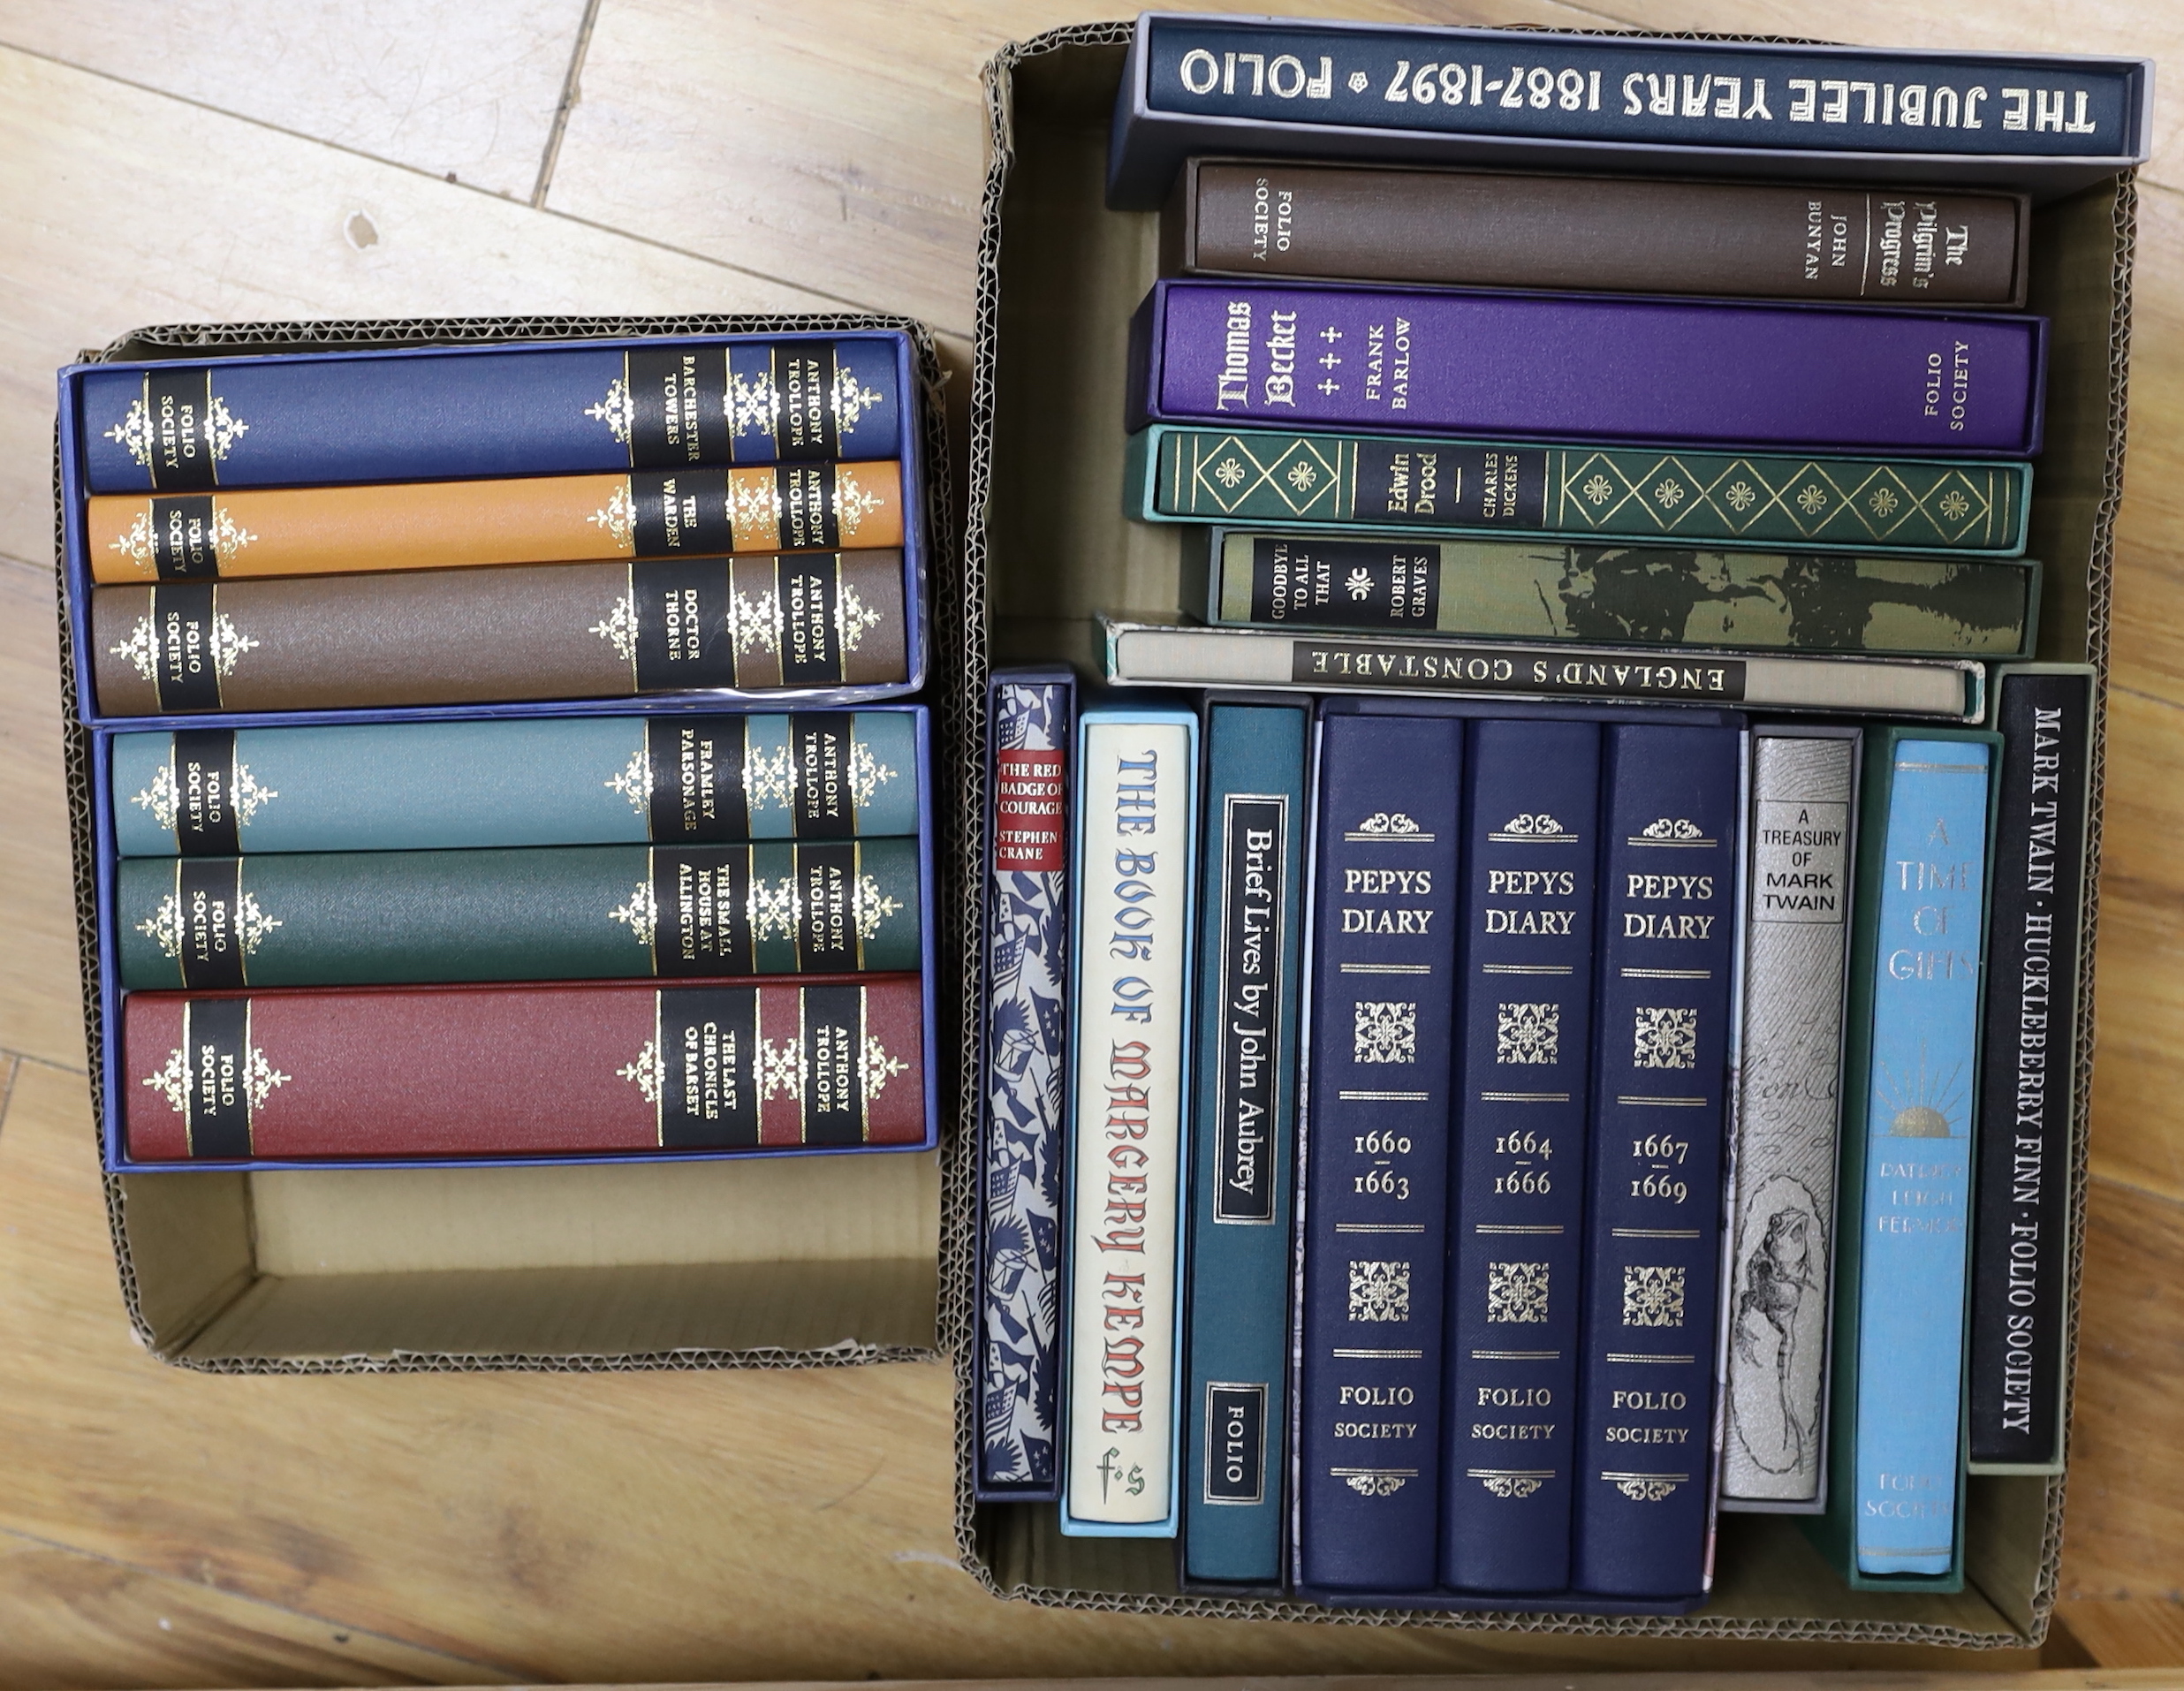 Folio Society - A Miscellany collection, boxed or slipcased including, six works by Anthony Trollope, Brief Lives by John Aubrey and Englands Constable (21)